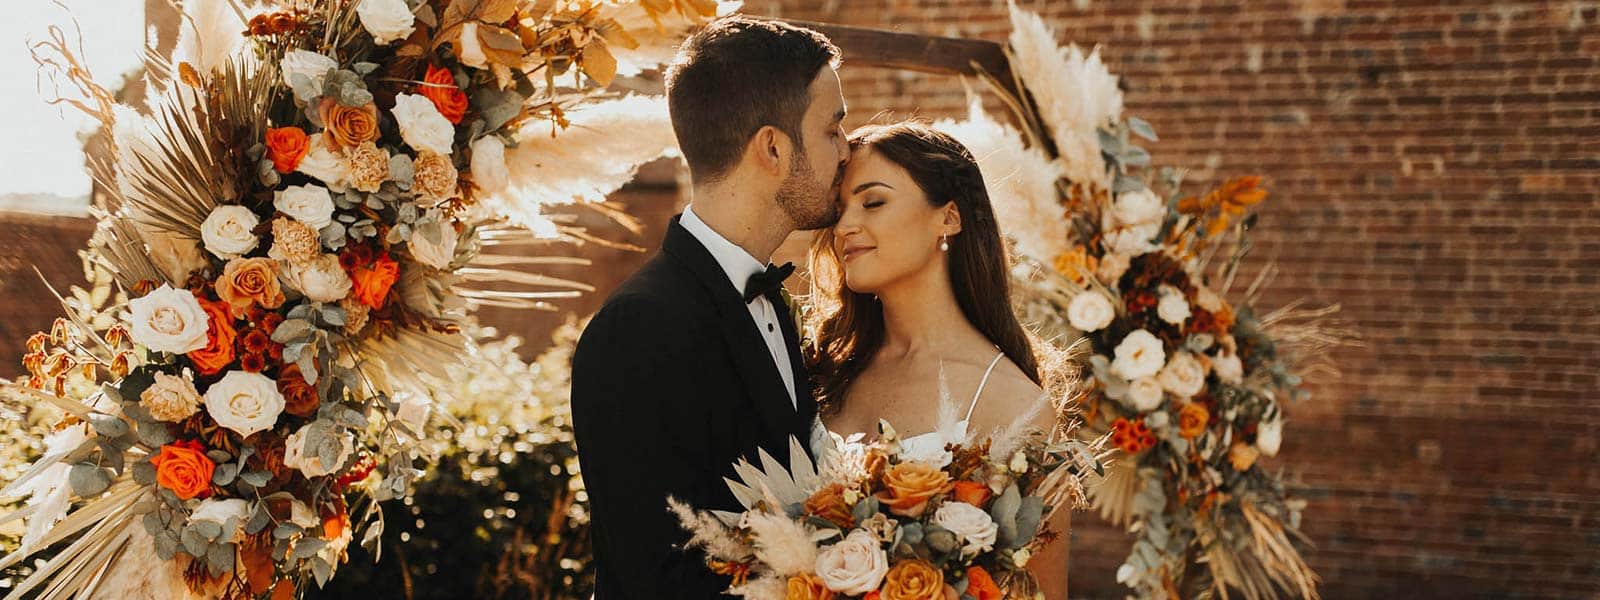 How to style your elopement?